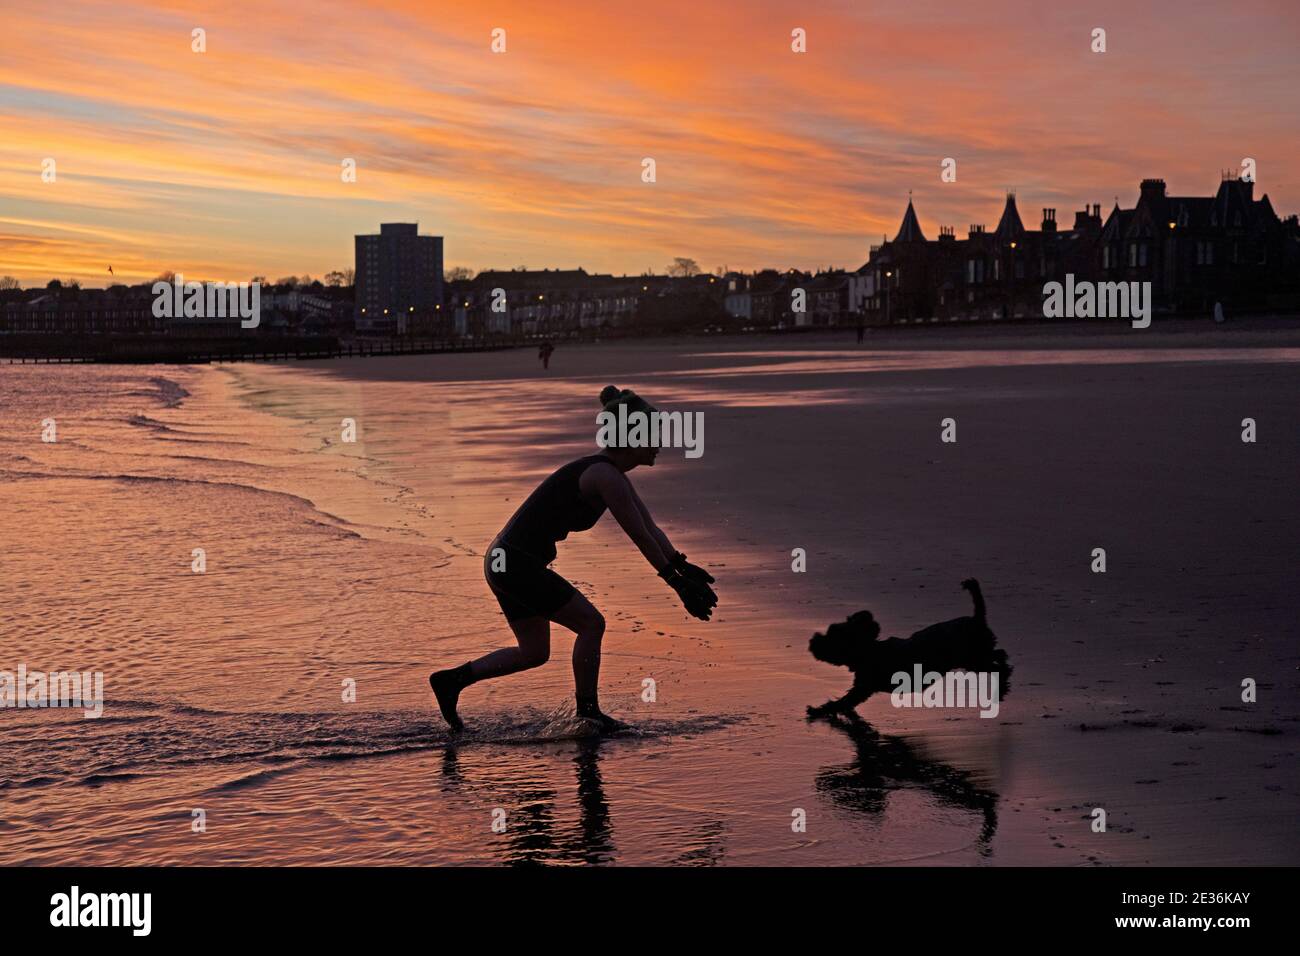 Portobello, Edinburgh, Scotland, UK. 17th January 2021. Stunning sunrise to greet those who visit the beach at dawn with temperature of 4 degrees centigrade at the seaside on the shore of the Firth of Forth. Pictured: spontaneous moment when one regular female cold water swimmer is greeted by her excited dog as she leaves the water. Renzo  has been the mascot dog   accompanying the  “ January Dookers “ every single morning as they swim to raise money for the charity SAMH (Scottish association for Mental health). Credit: Arch White/Alamy Live News. Stock Photo